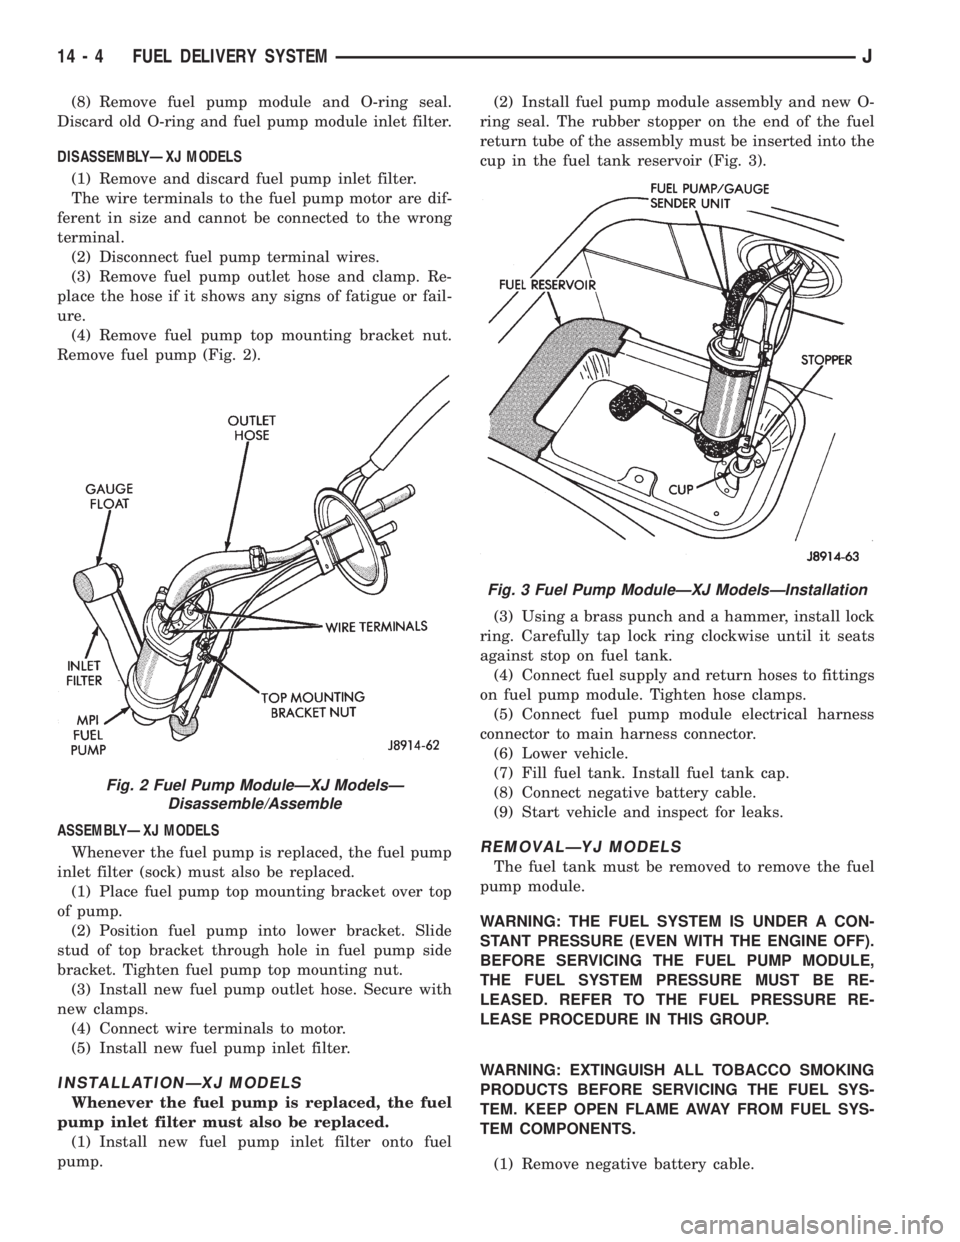 JEEP XJ 1995  Service And Service Manual (8) Remove fuel pump module and O-ring seal.
Discard old O-ring and fuel pump module inlet filter.
DISASSEMBLYÐXJ MODELS
(1) Remove and discard fuel pump inlet filter.
The wire terminals to the fuel 